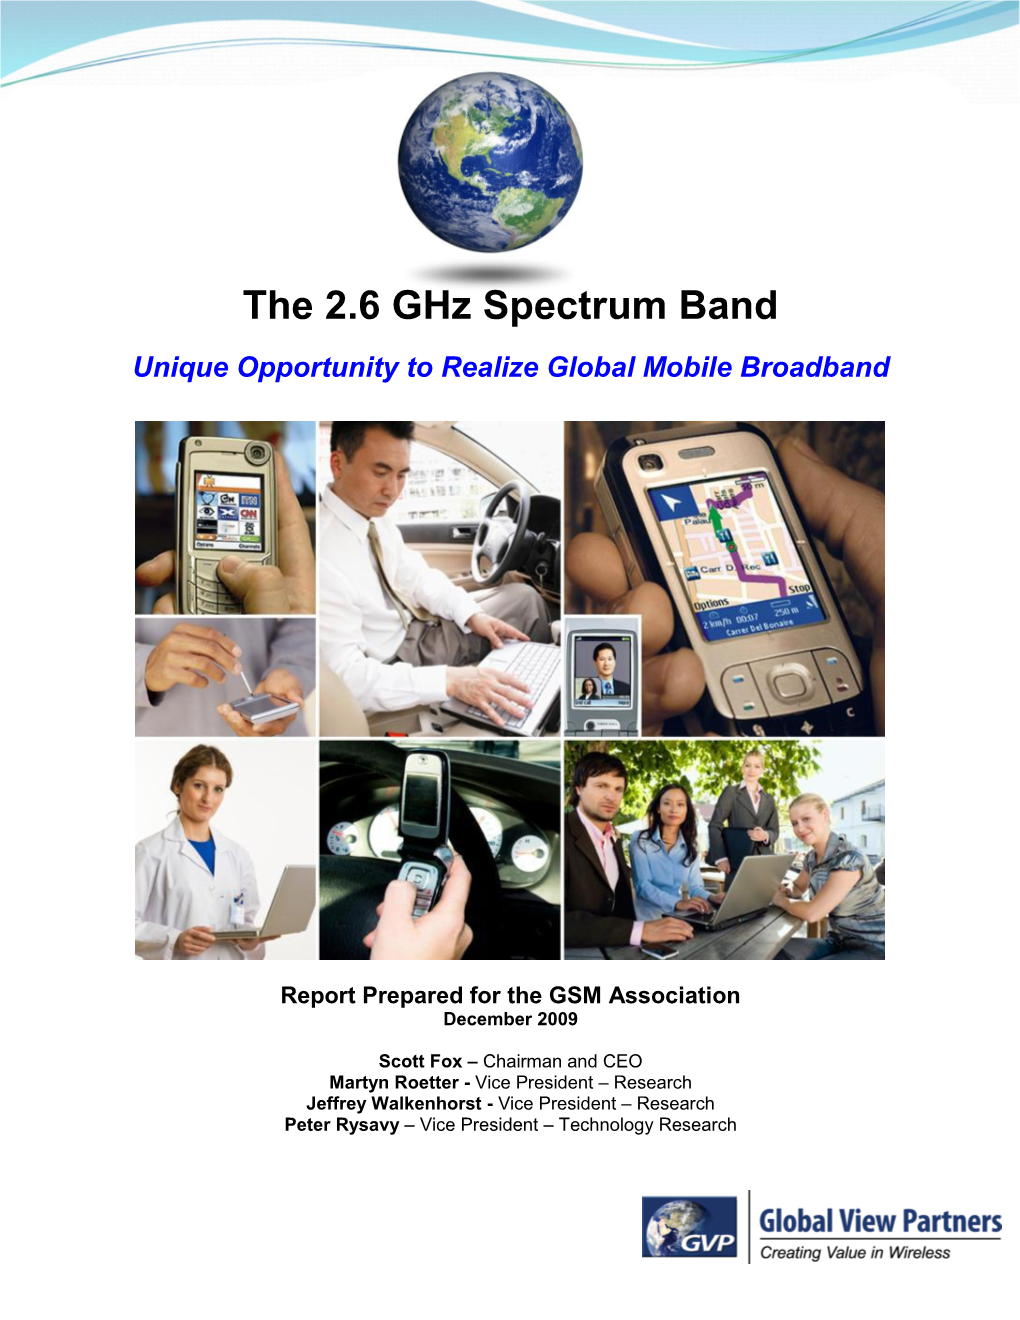 The 2.6 Ghz Spectrum Band